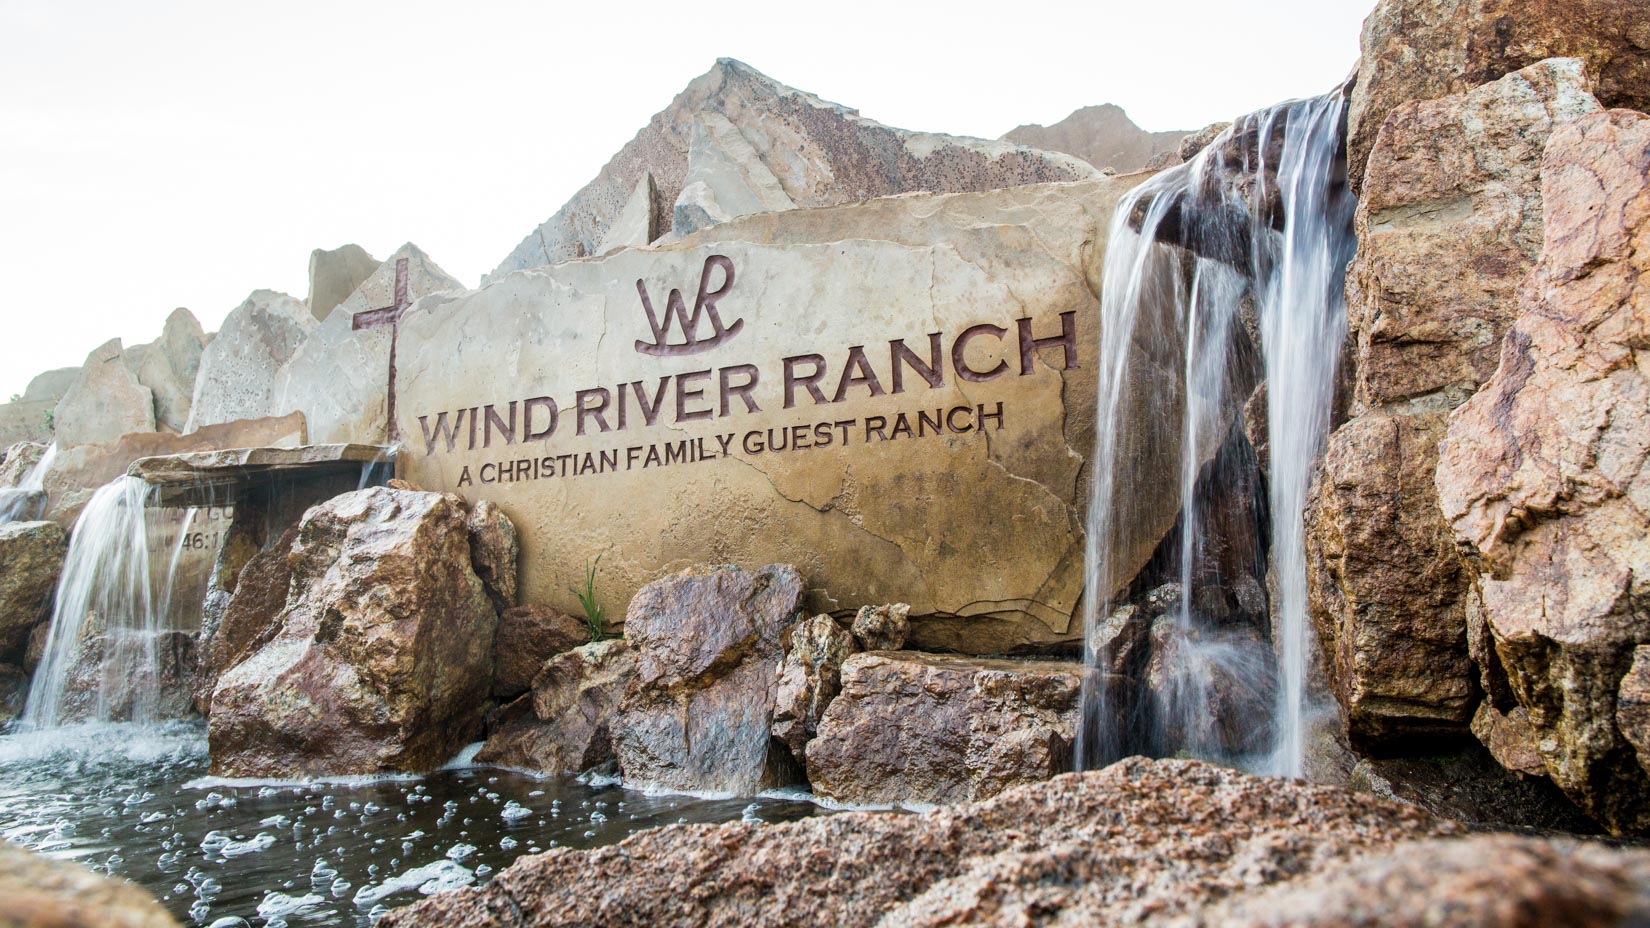 A sign at the welcome gate of the camp thats has Wind River Ranch engraved.